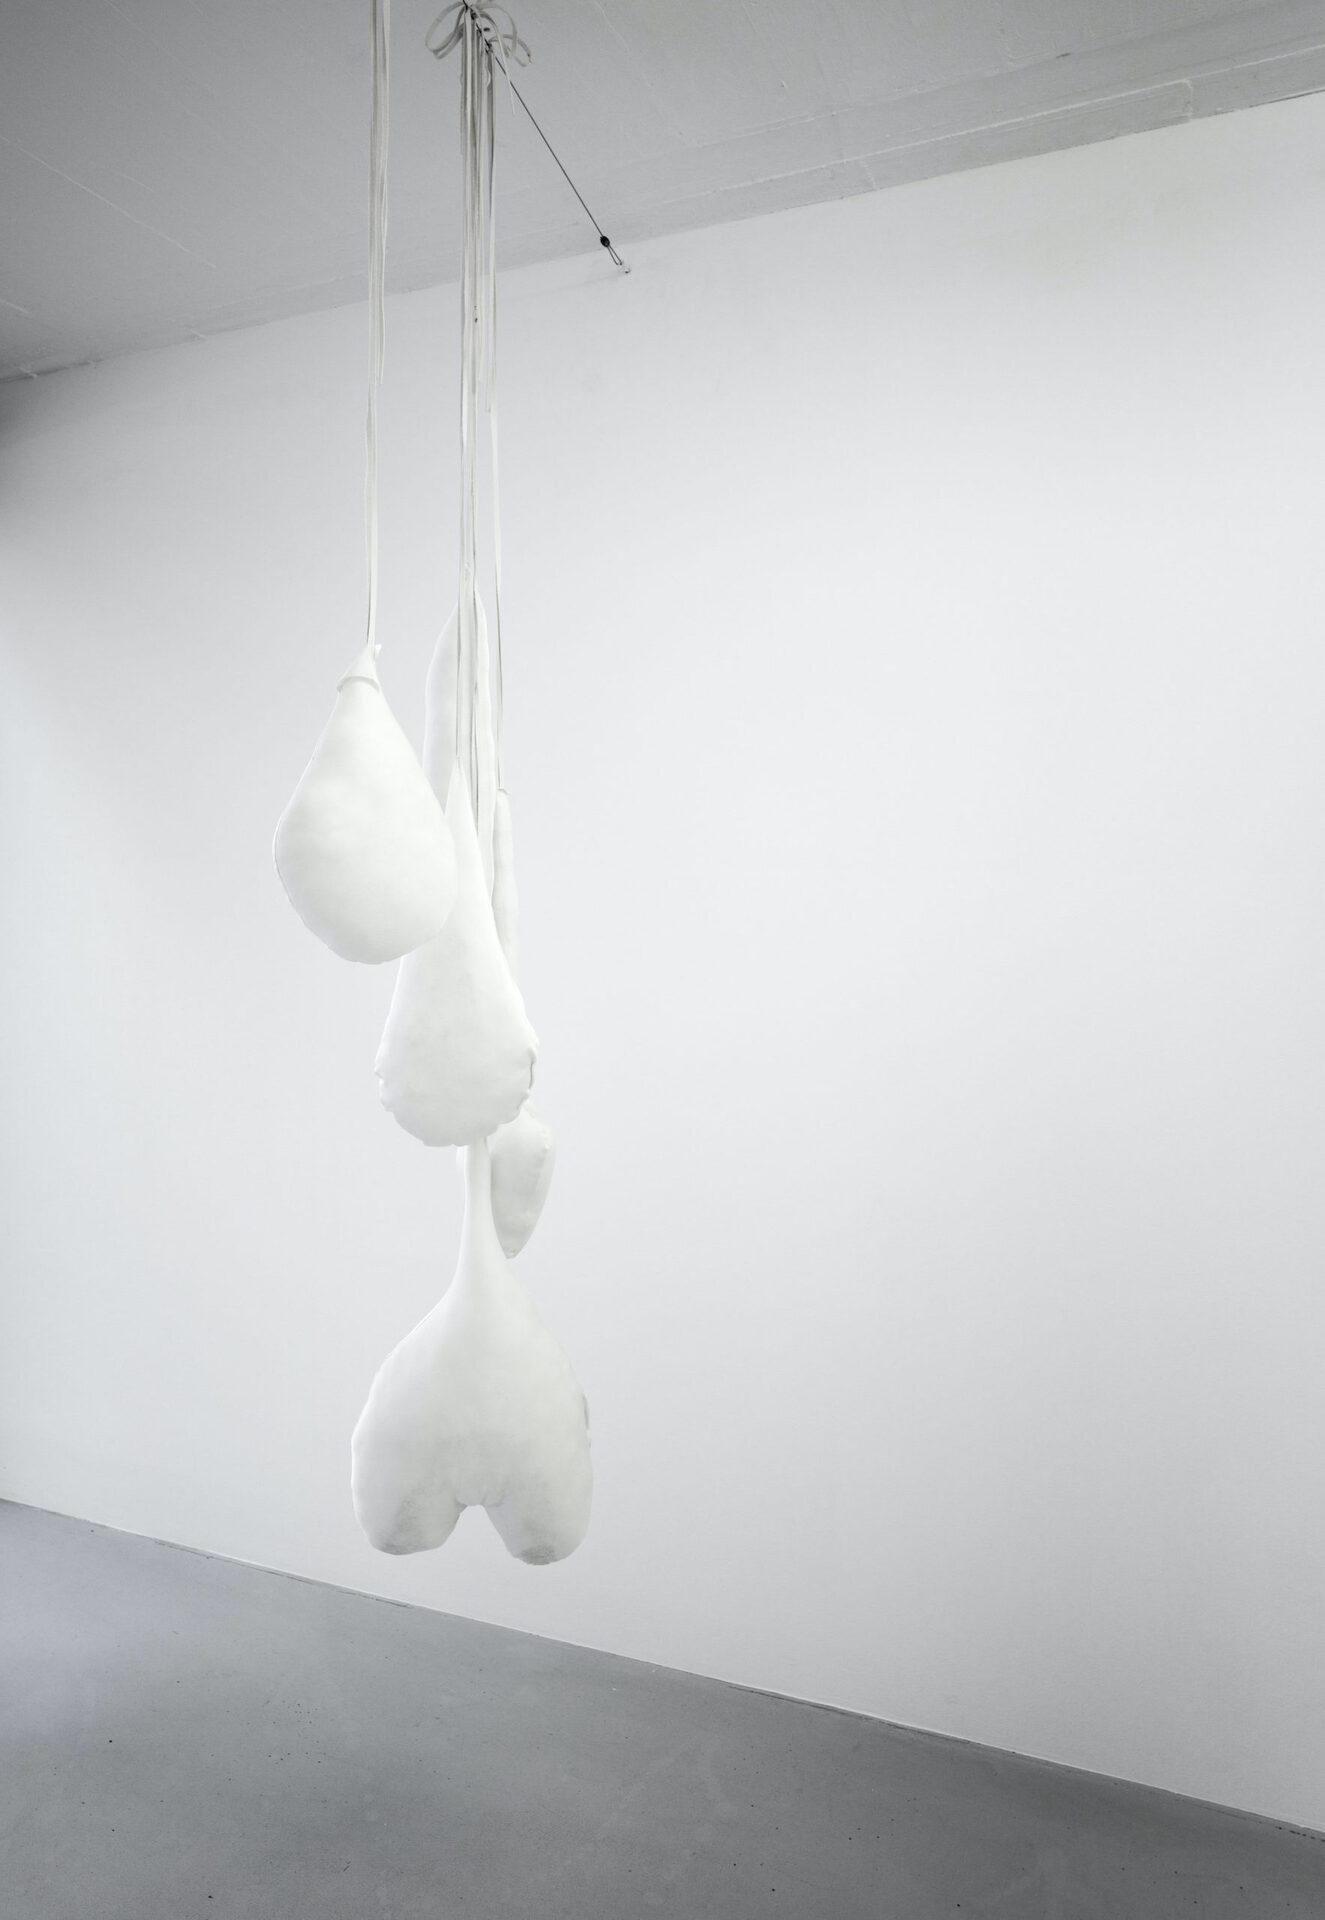 Franca Scholz, Tits and more tears, padded cotton, installation, dimensions variable,2021